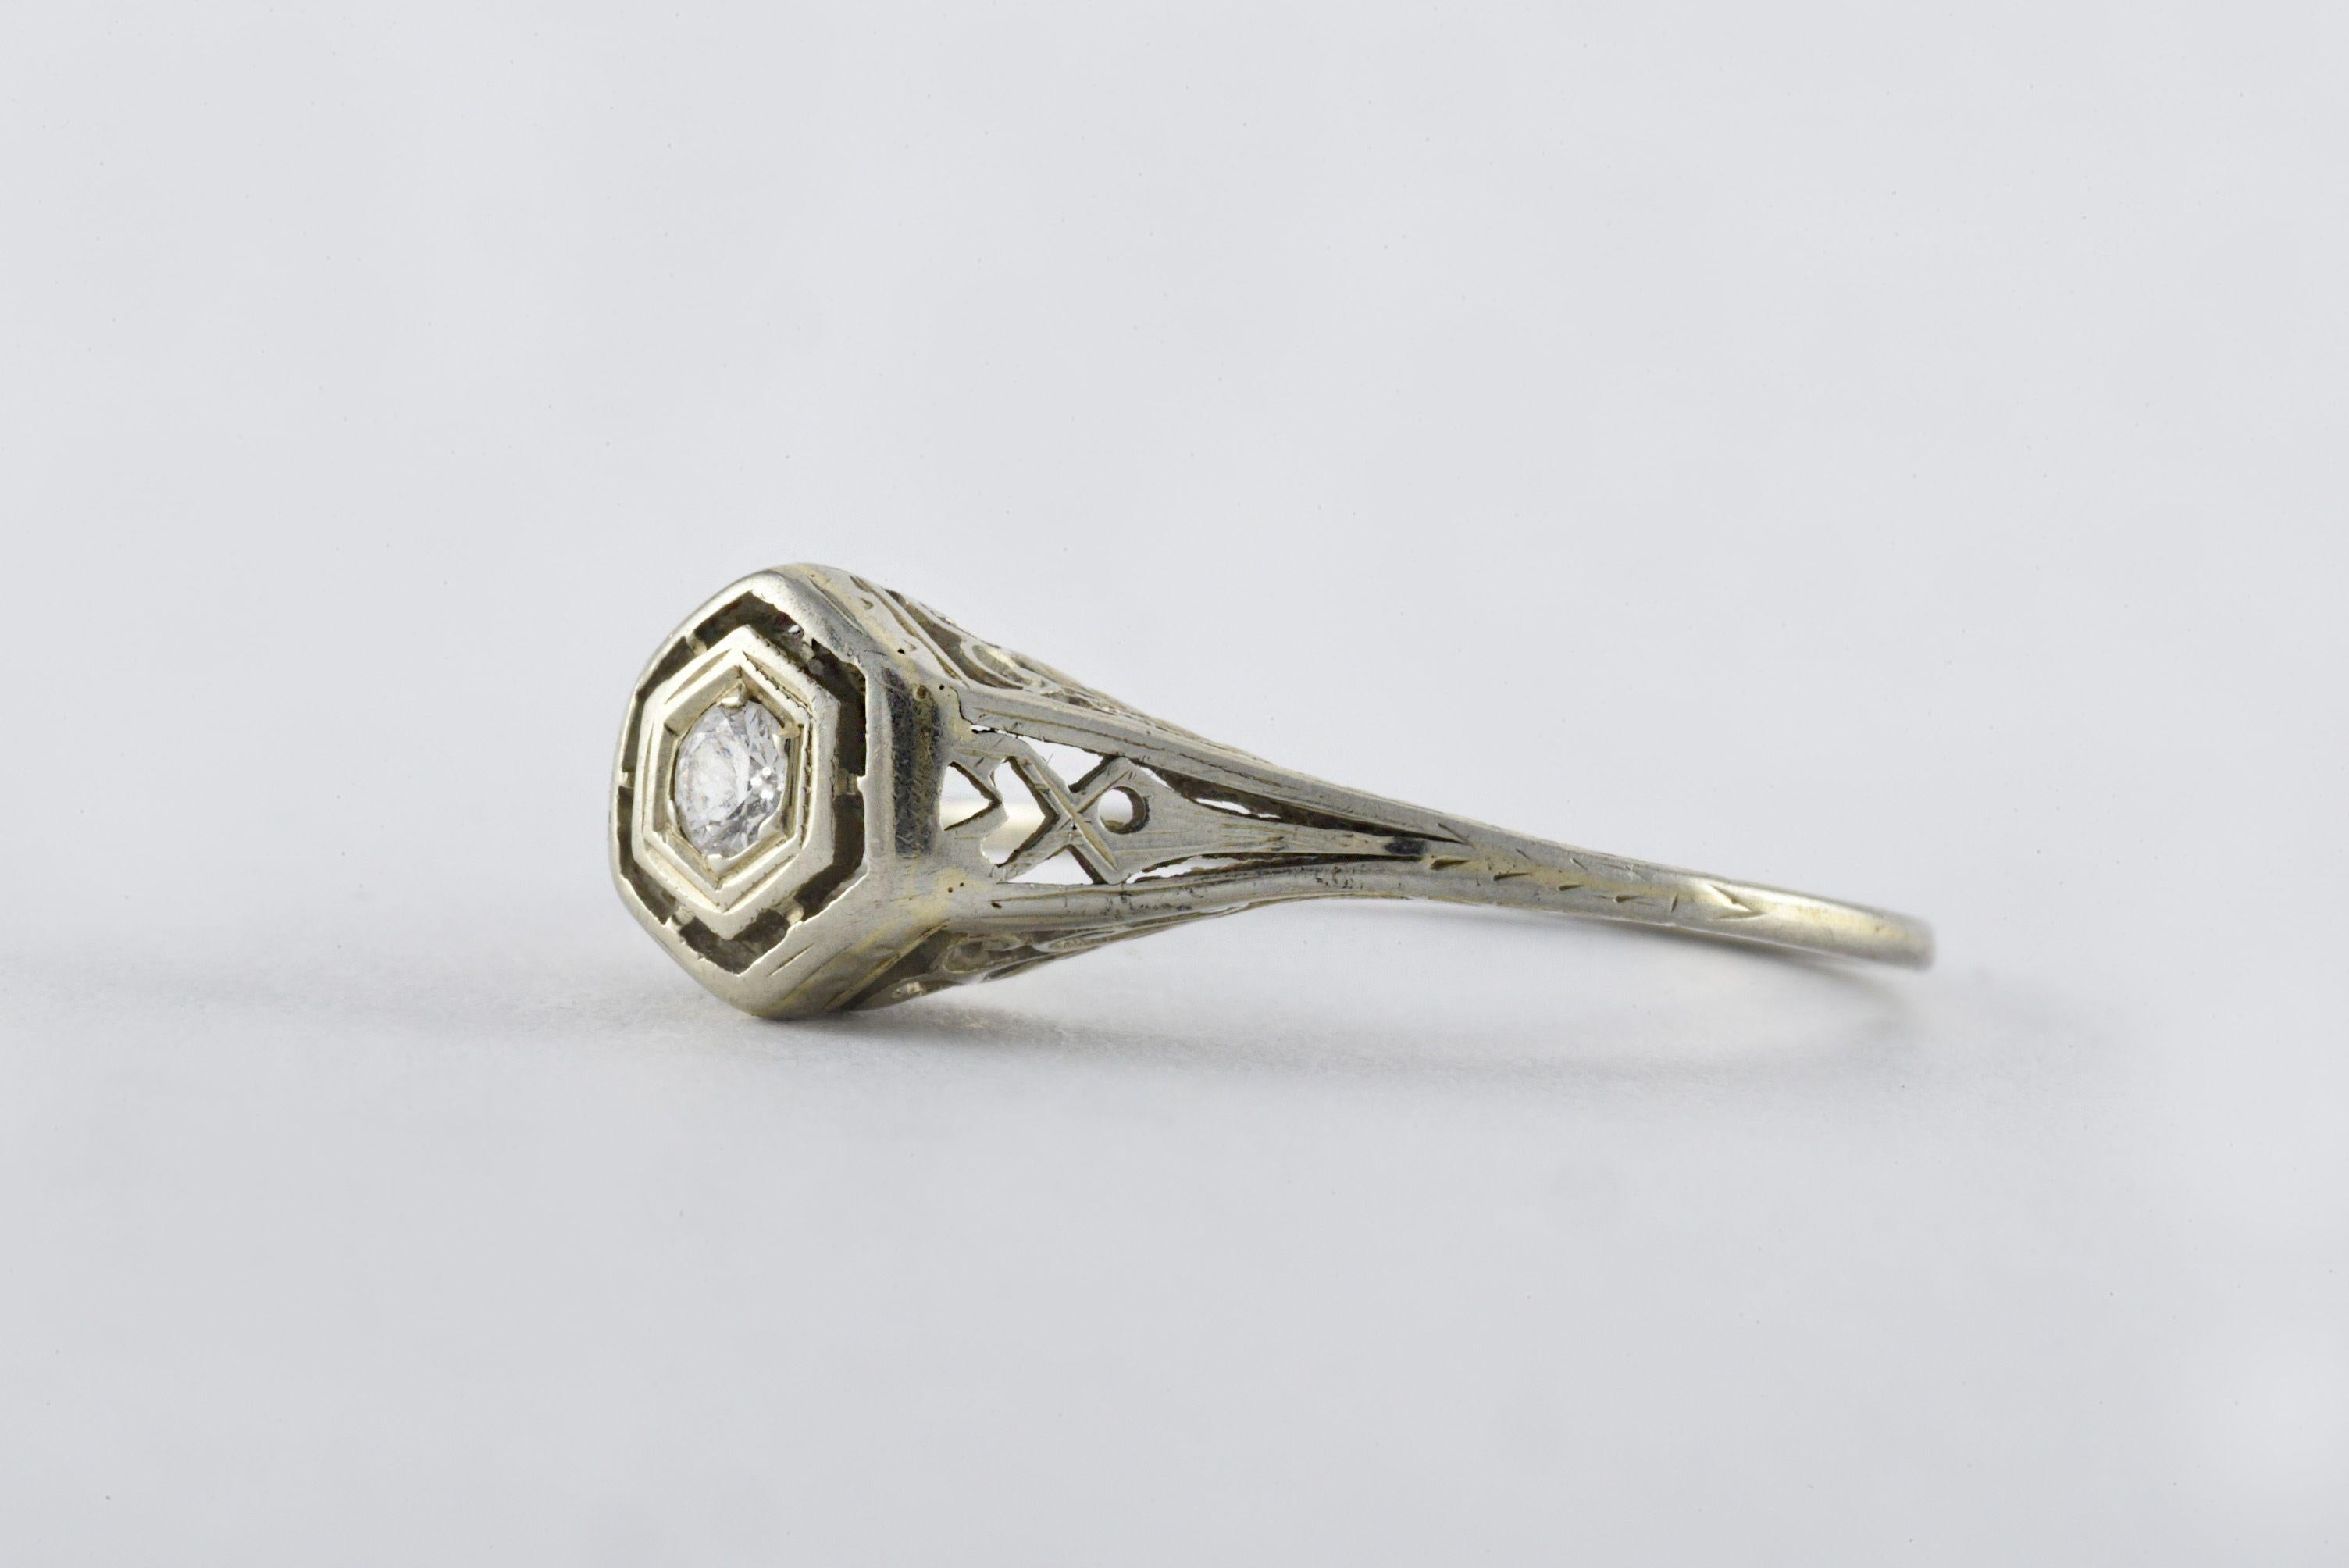 Crafted in the 1920s from 18kt white gold, this Art Deco band features an Old European cut diamond measuring approximately 0.10 carats and fine filigree details.
